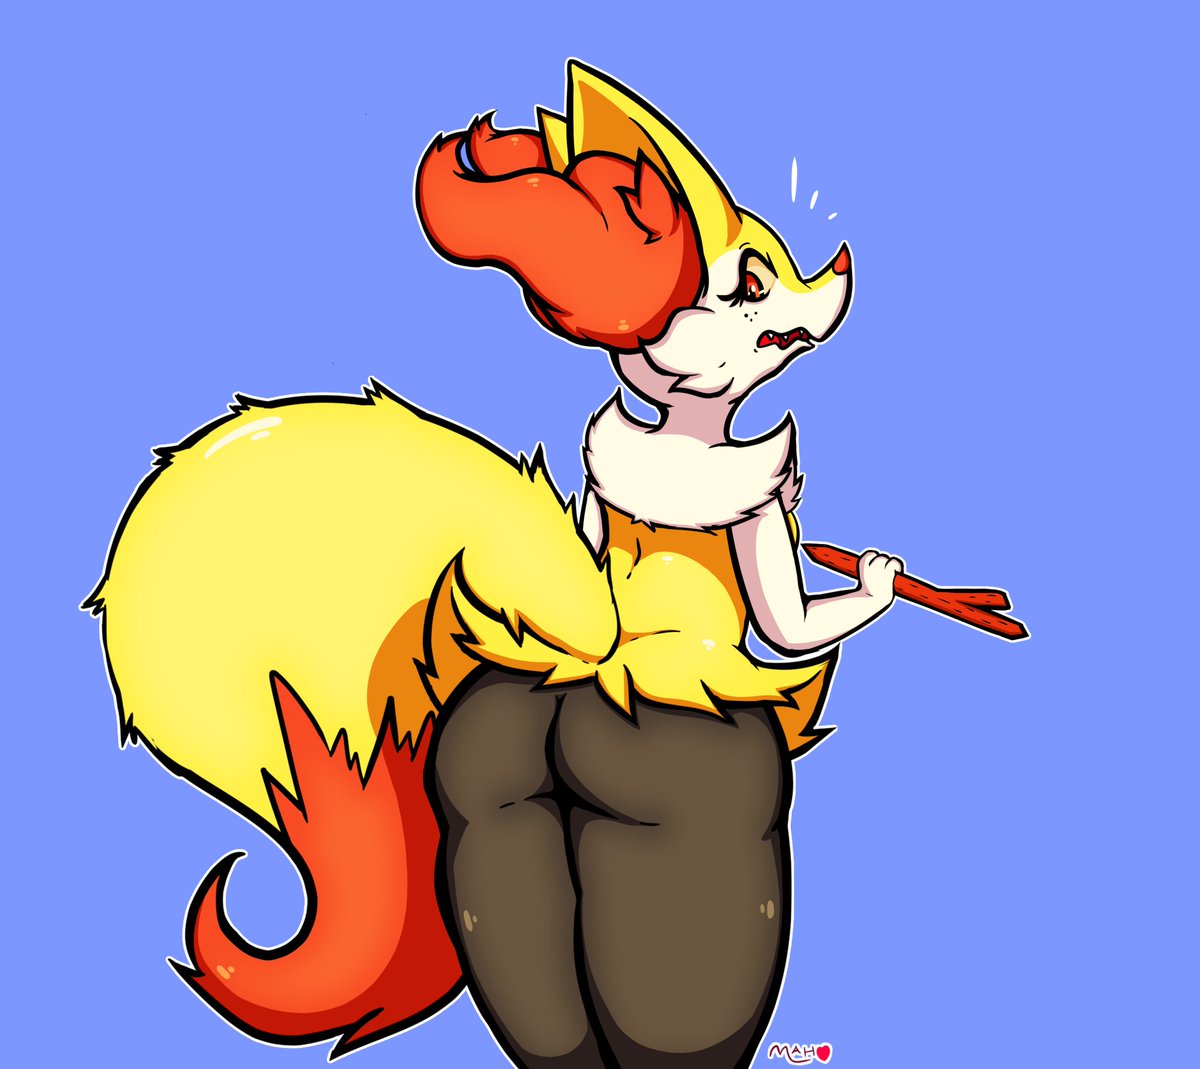 Braixen noticed you were staring at her when she was picking up her stick #Braixen...